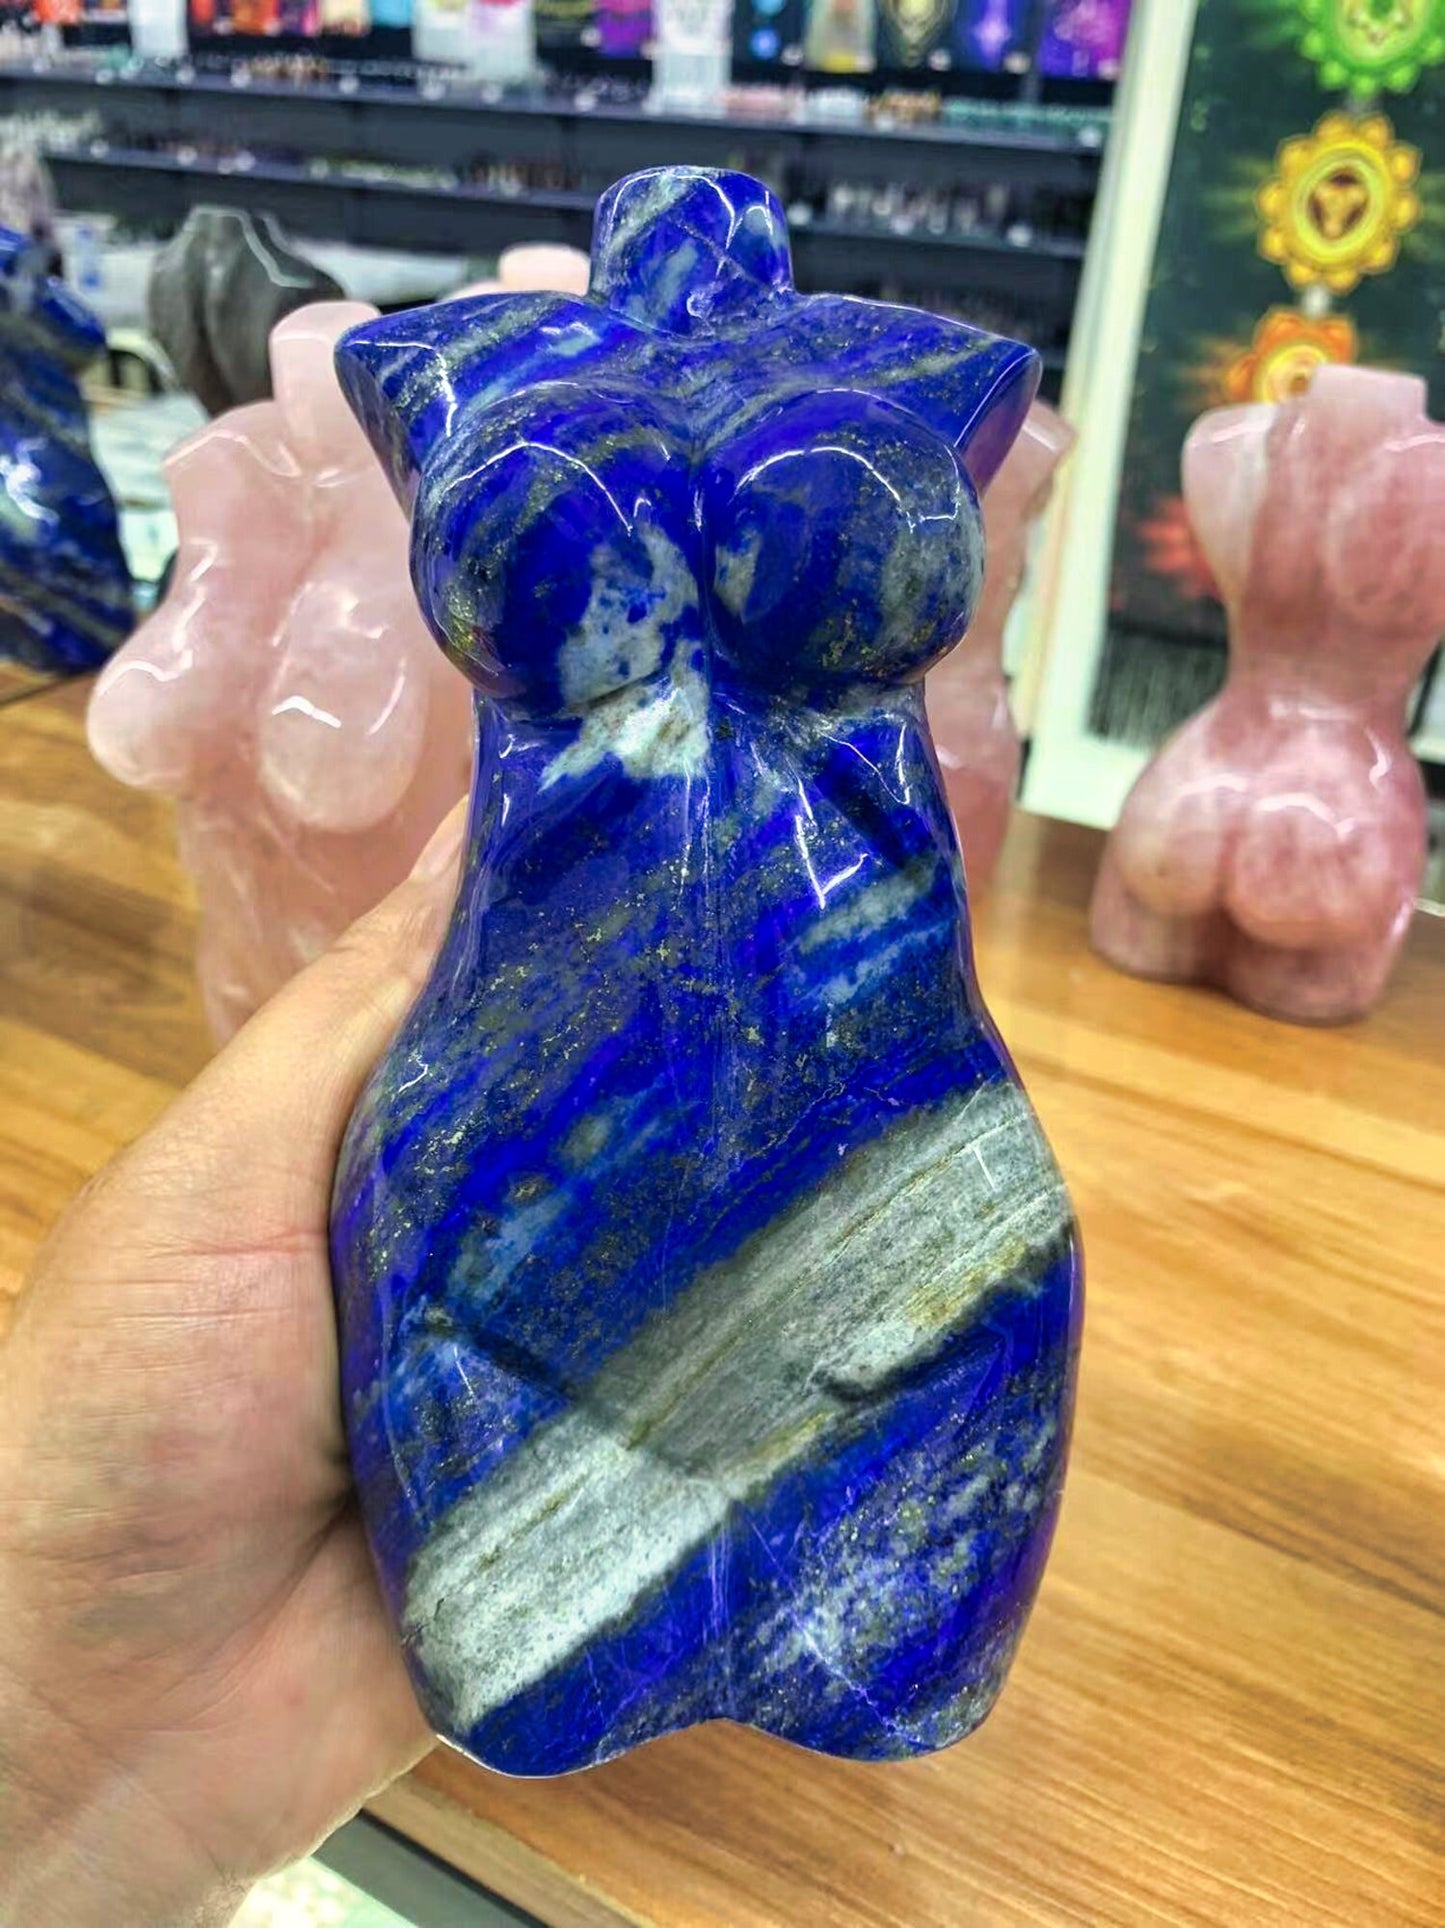 Natural Lapis Lazuli Crystal Carved Pieces - Beautiful Room and Office Decoration, Perfect Reiki Healing Gift from Top Collection